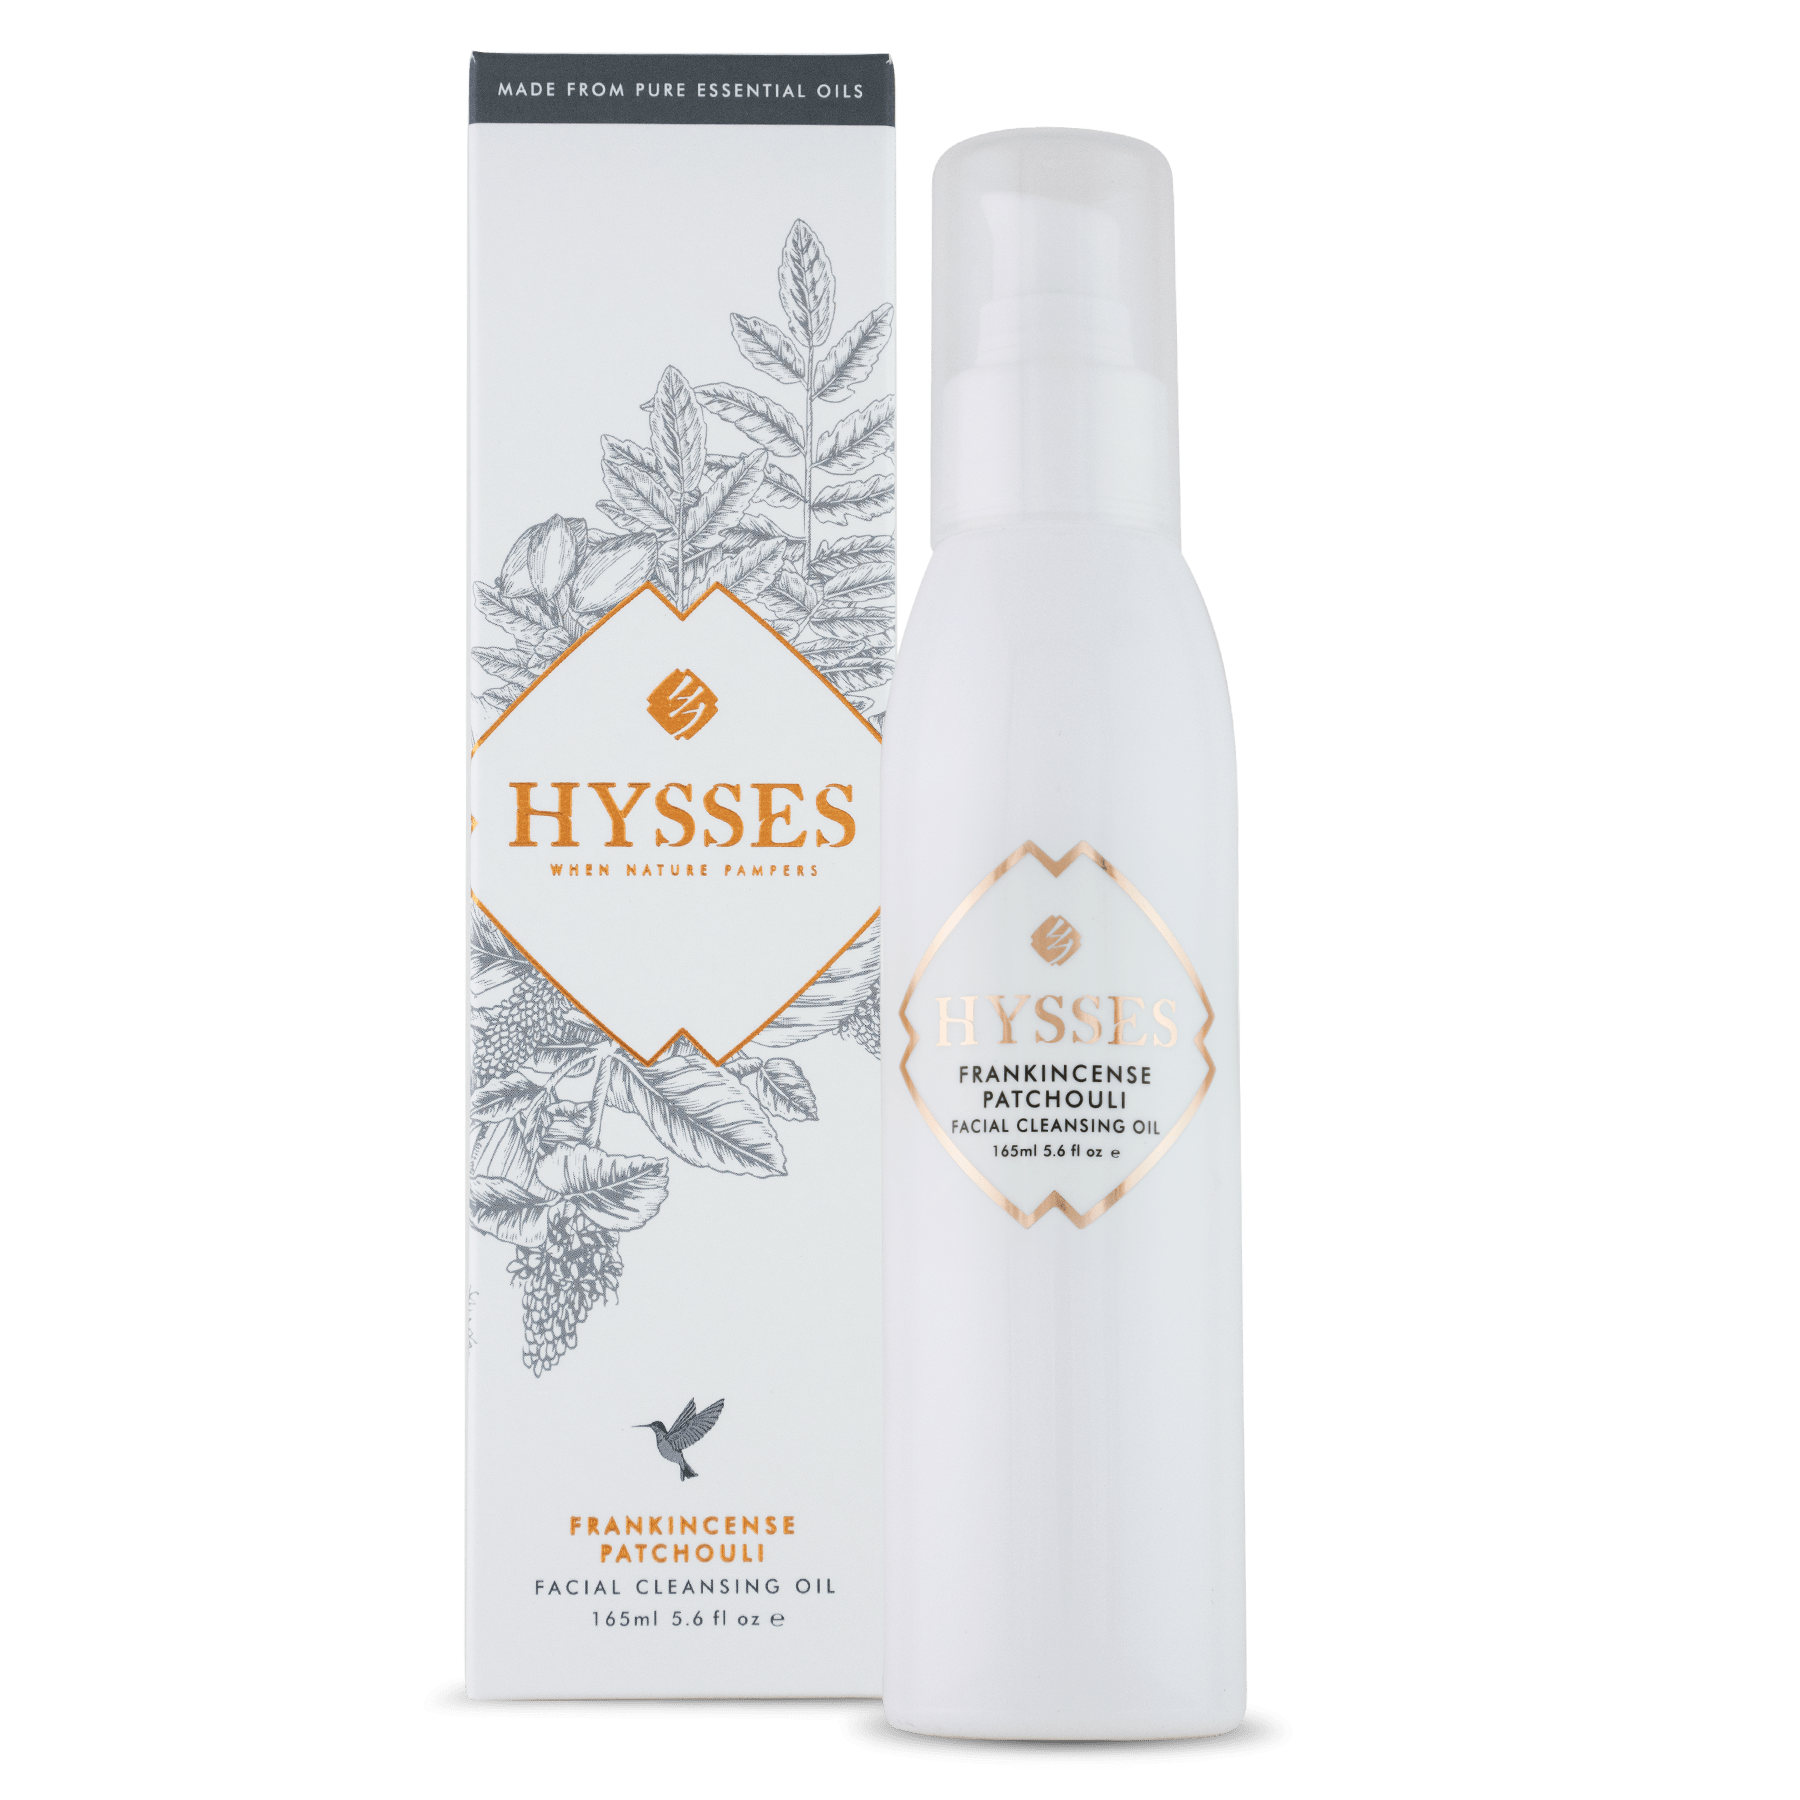 Hysses Face Care Facial Cleansing Oil Frankincense Patchouli